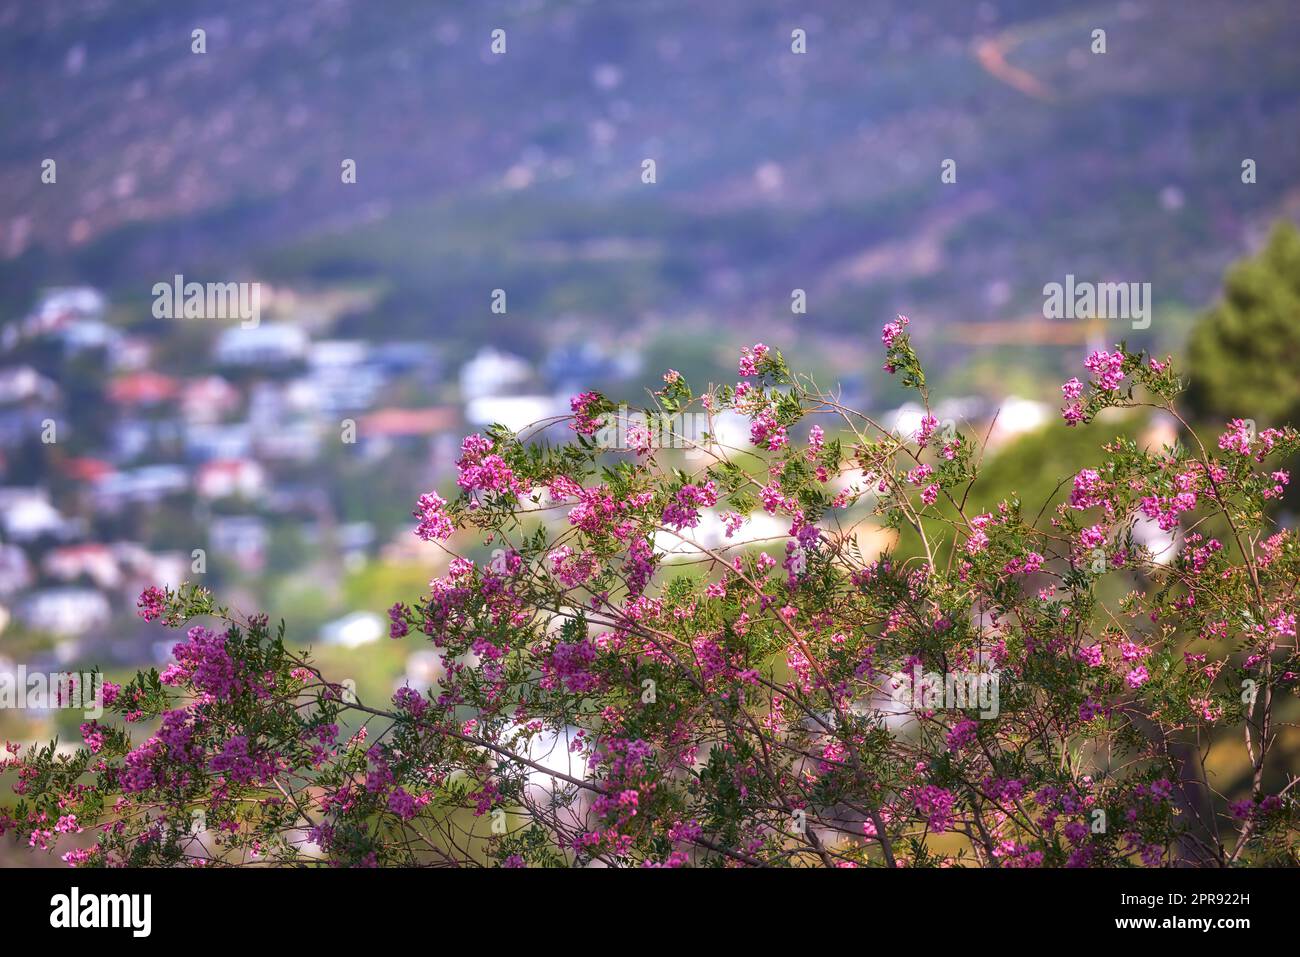 Pink paperflower on green stems growing on a hill side against a urban city background. Closeup of scenic landscape environment with fine bush indigenous plant and flower species growing on mountain Stock Photo